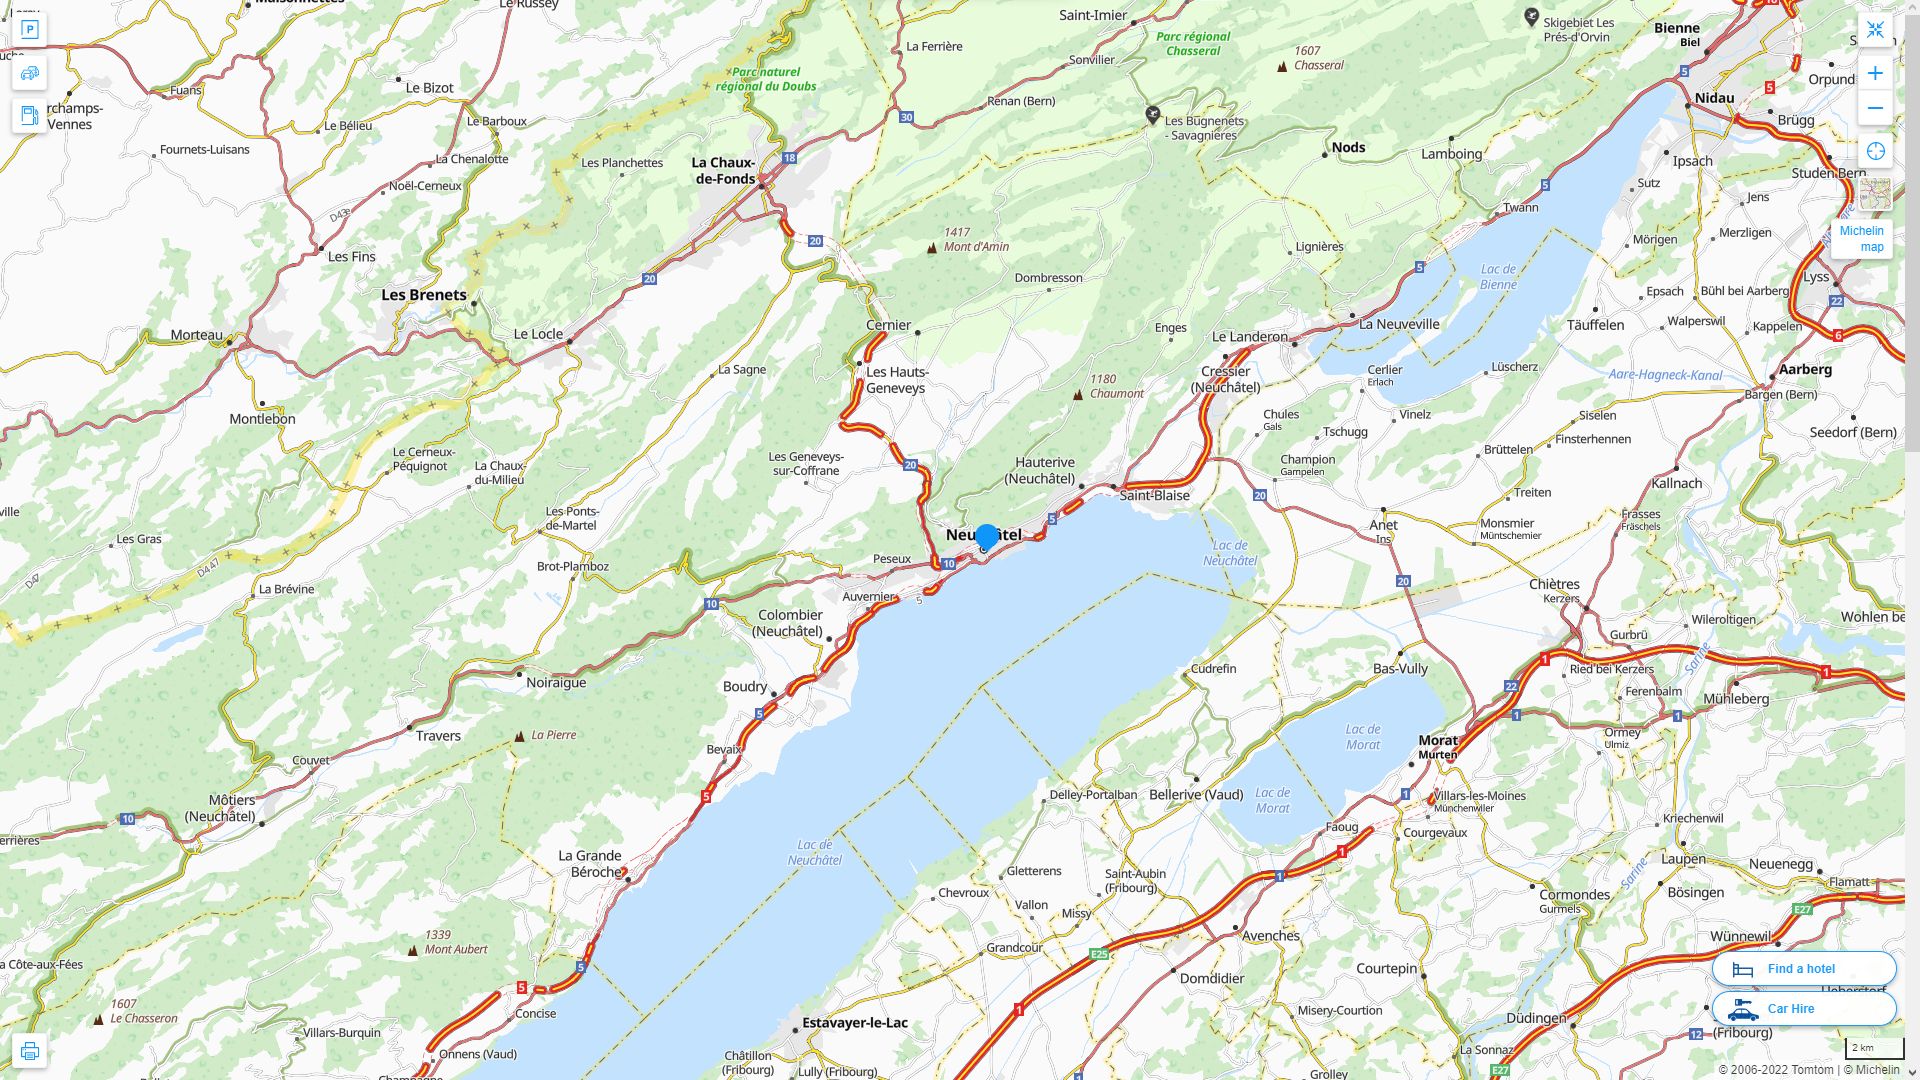 Neuchatel Highway and Road Map